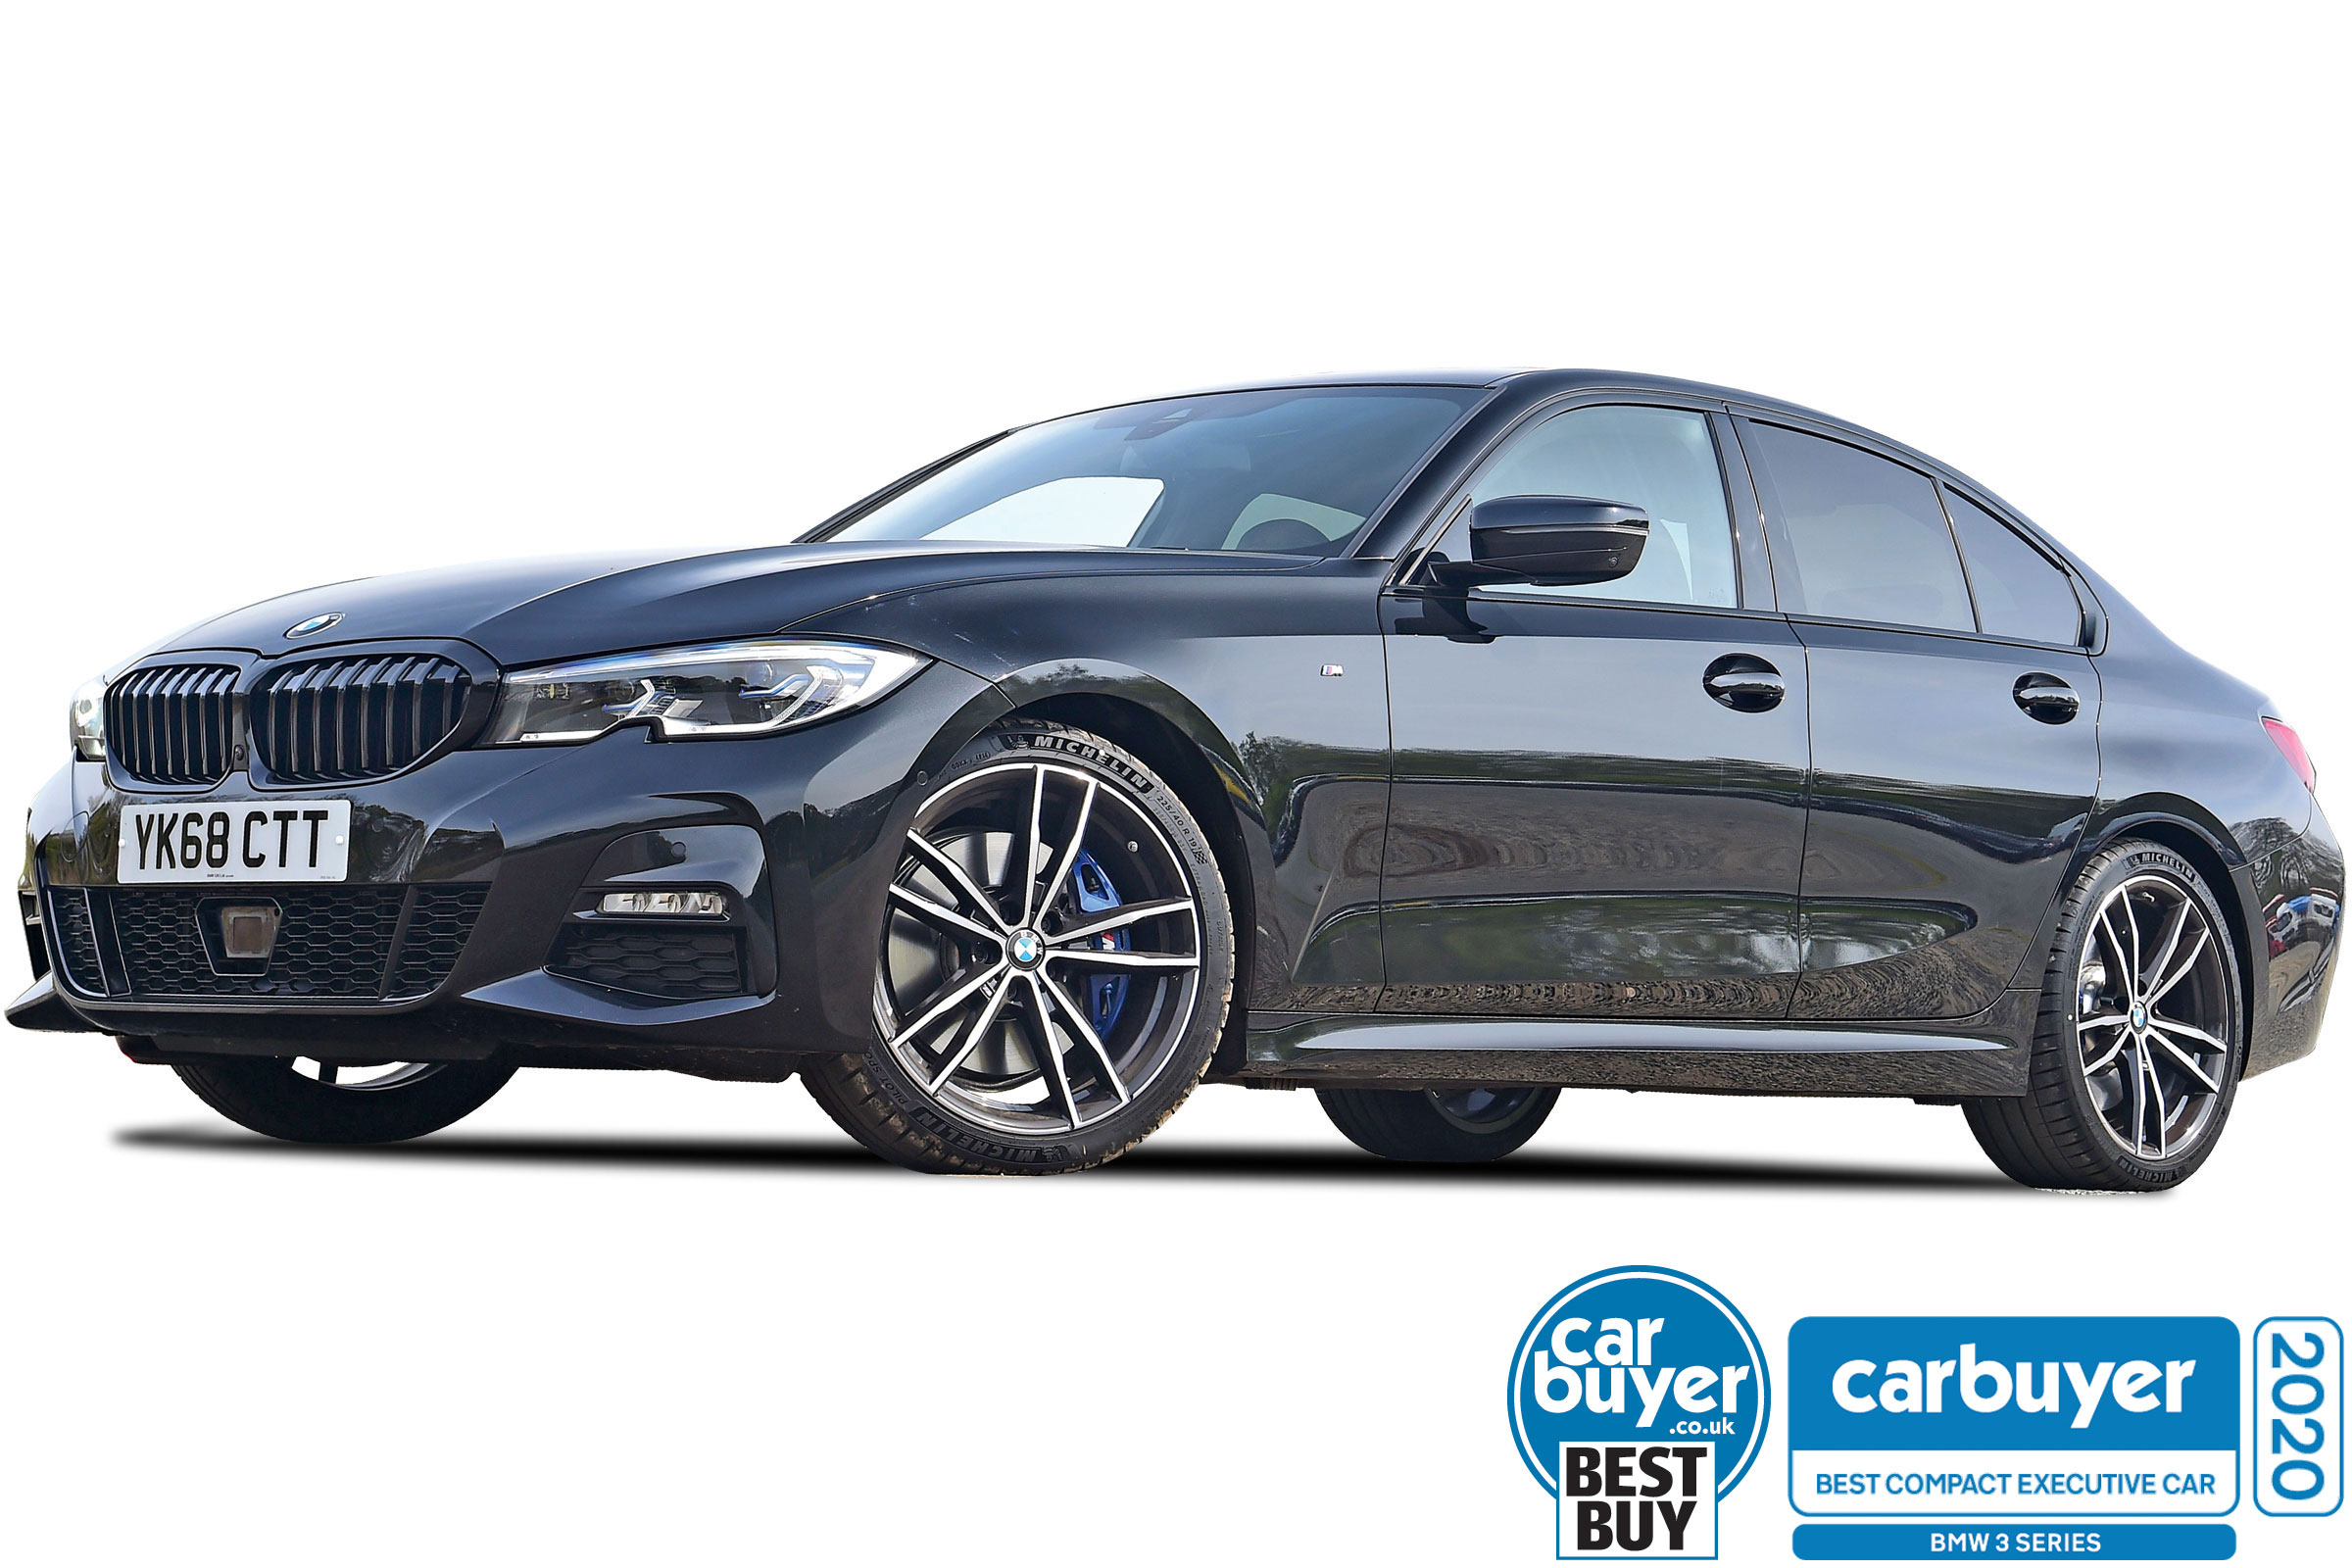 Bmw 3 Series Saloon Review Carbuyer